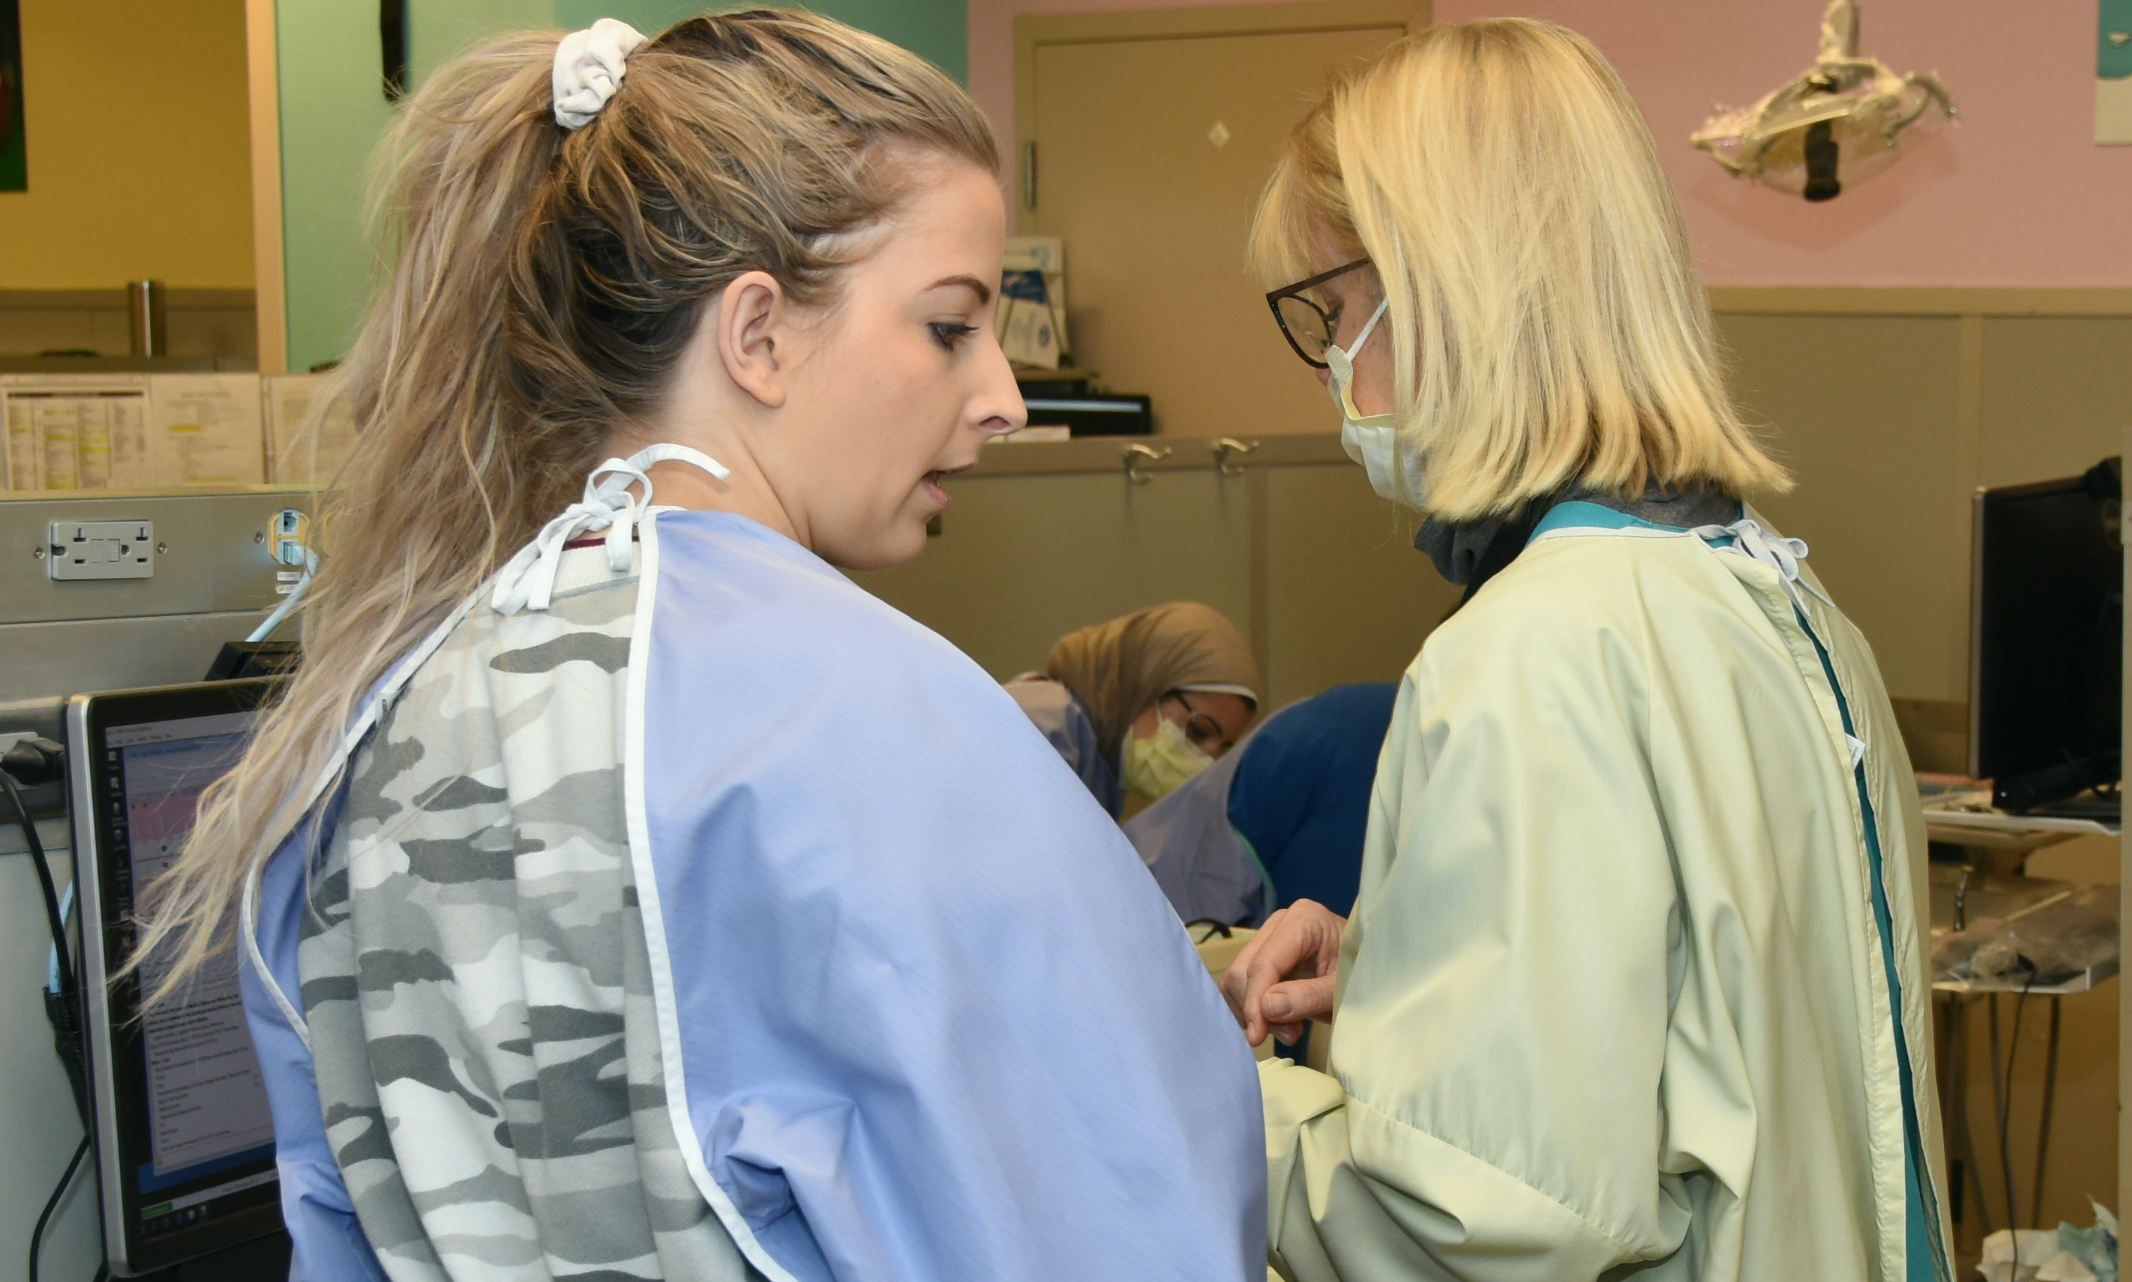 Dental students provide care under faculty supervision.